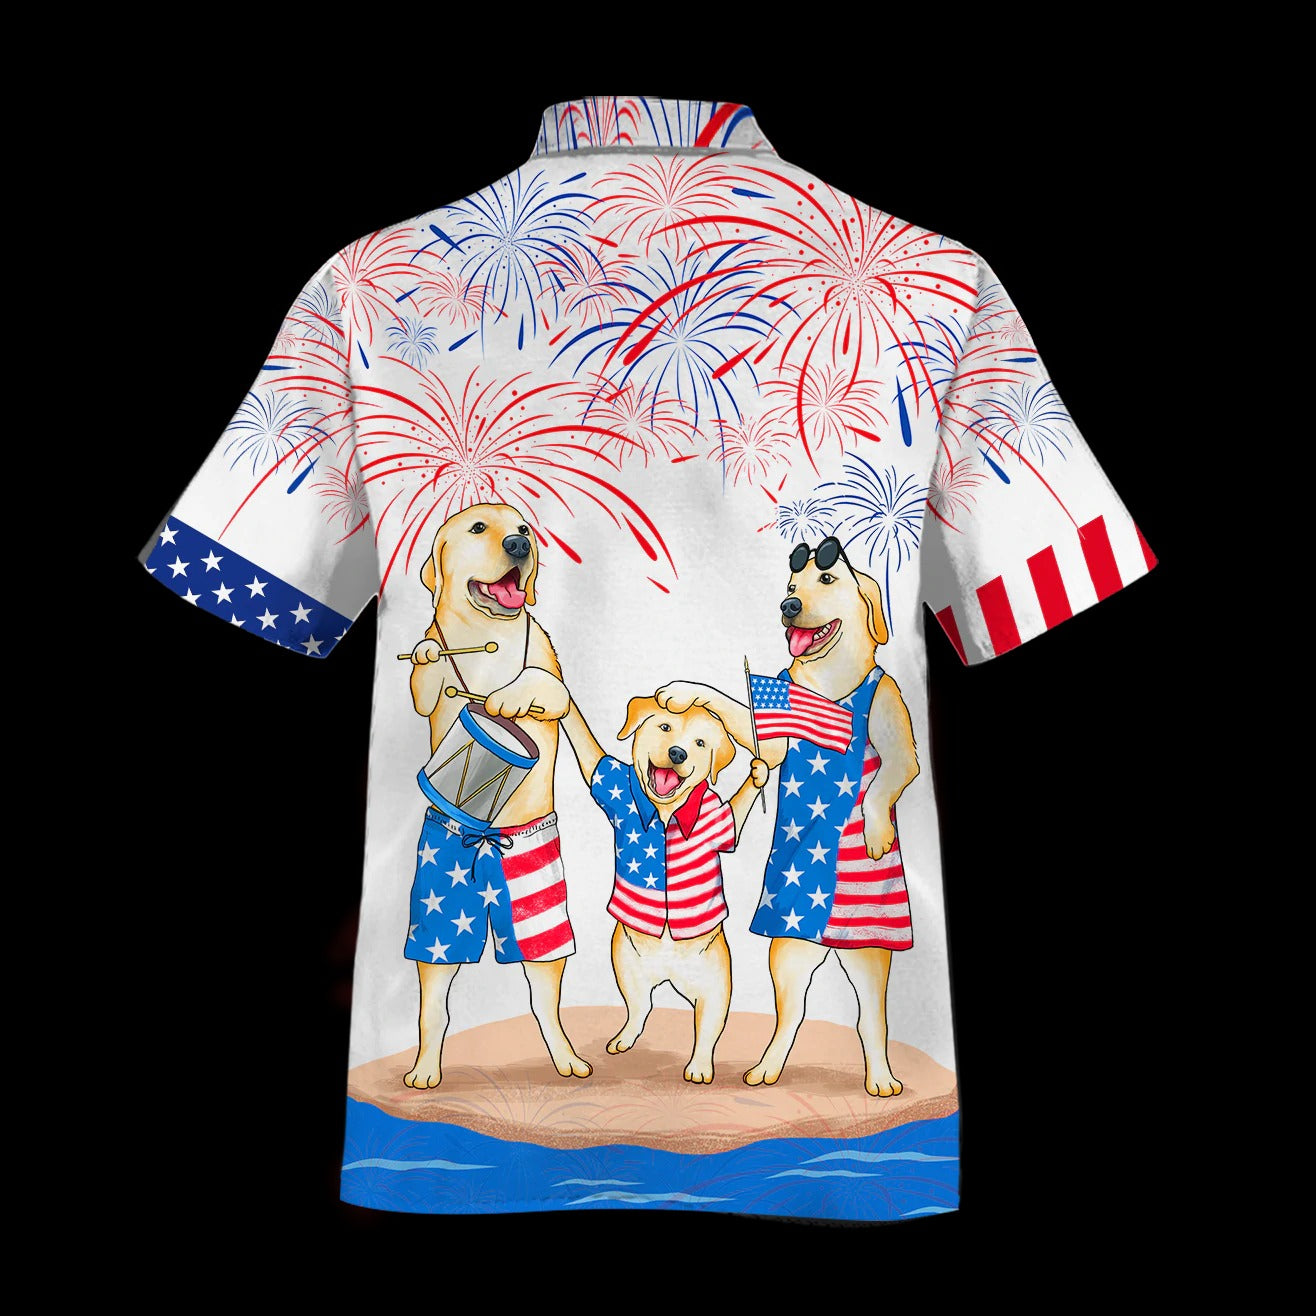 Labrador Family Hawaiian Shirt For Independence Day/ Funny Dog Hawaii Beach Shirt/ Cool 4Th Of July Present